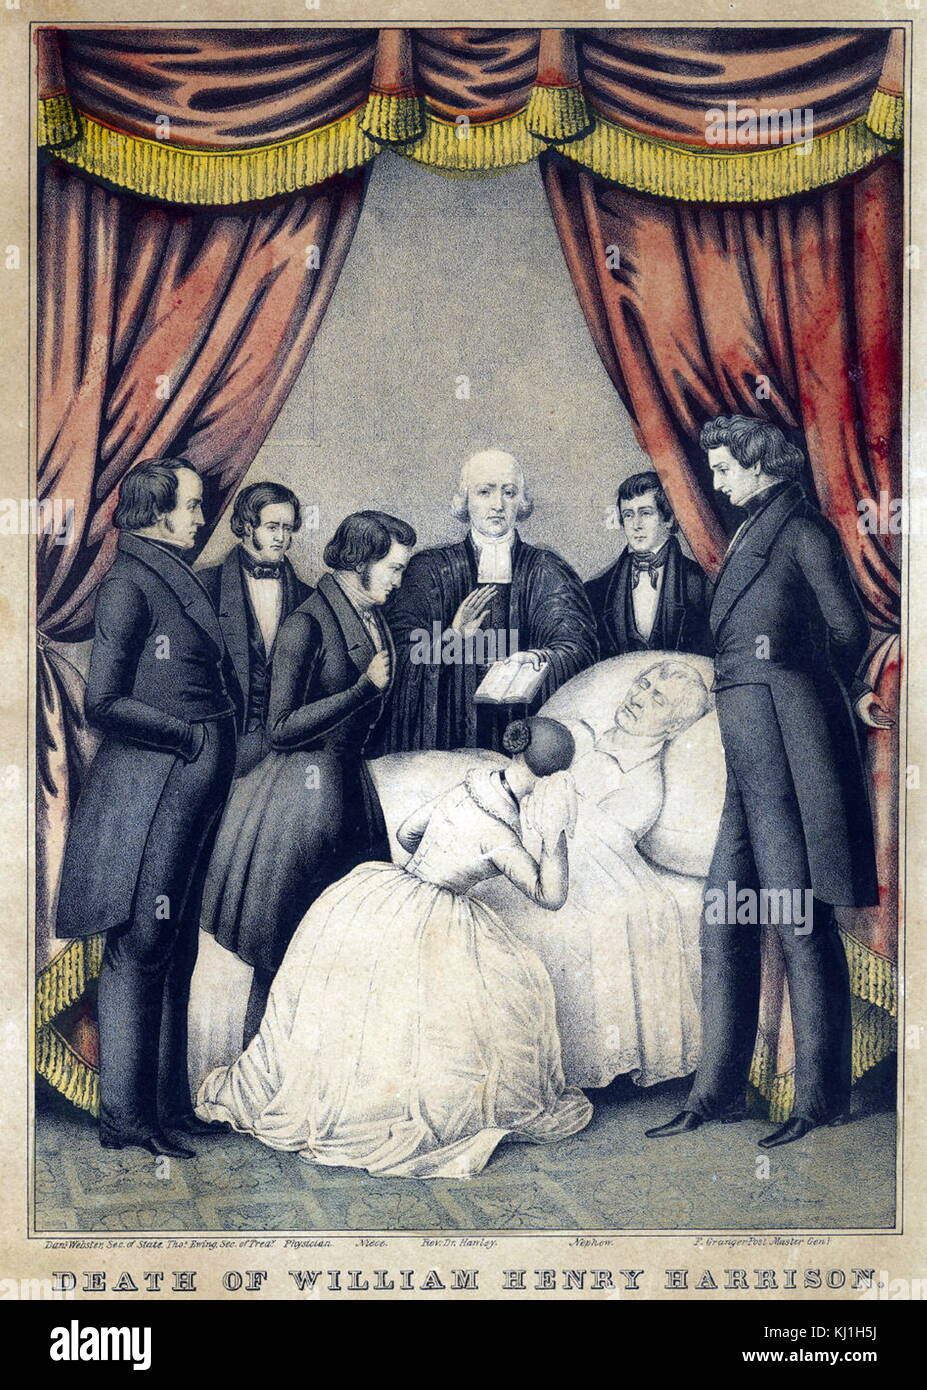 Death of William Henry Harrison Sr. (1773 – April 4, 1841) President of the United States (1841), an American military officer, and the last president born as a British subject. He was 68 years, 23 days old at the time of his inauguration. He died of complications from pneumonia 31 days into his term. Stock Photo